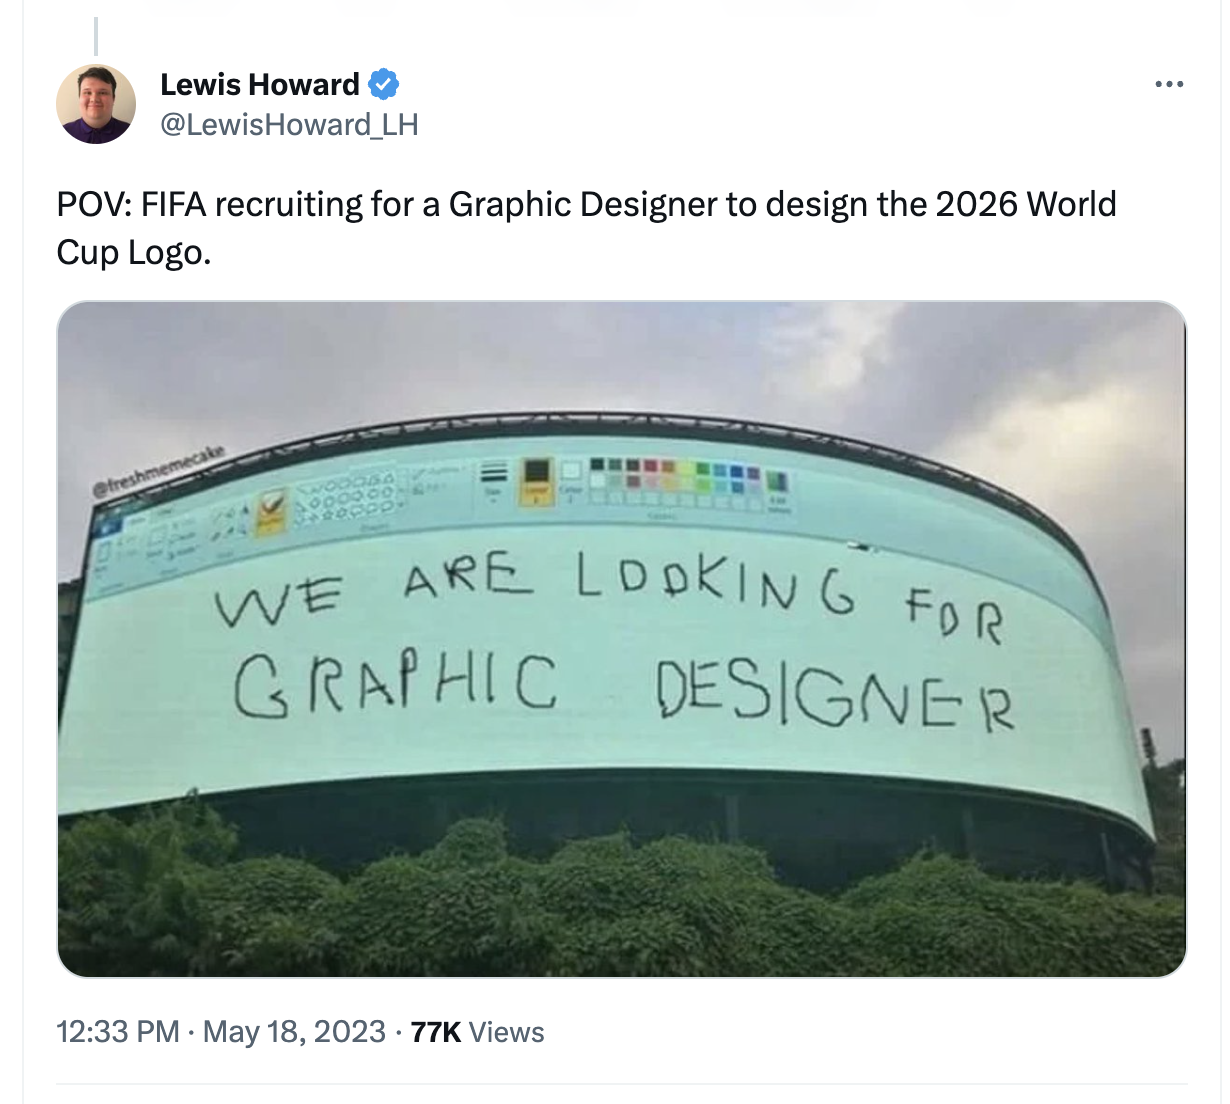 FIFA 2026 Logo Disaster Best Tweets: Stadium with poor handwriting saying "We are looking for graphic designers"